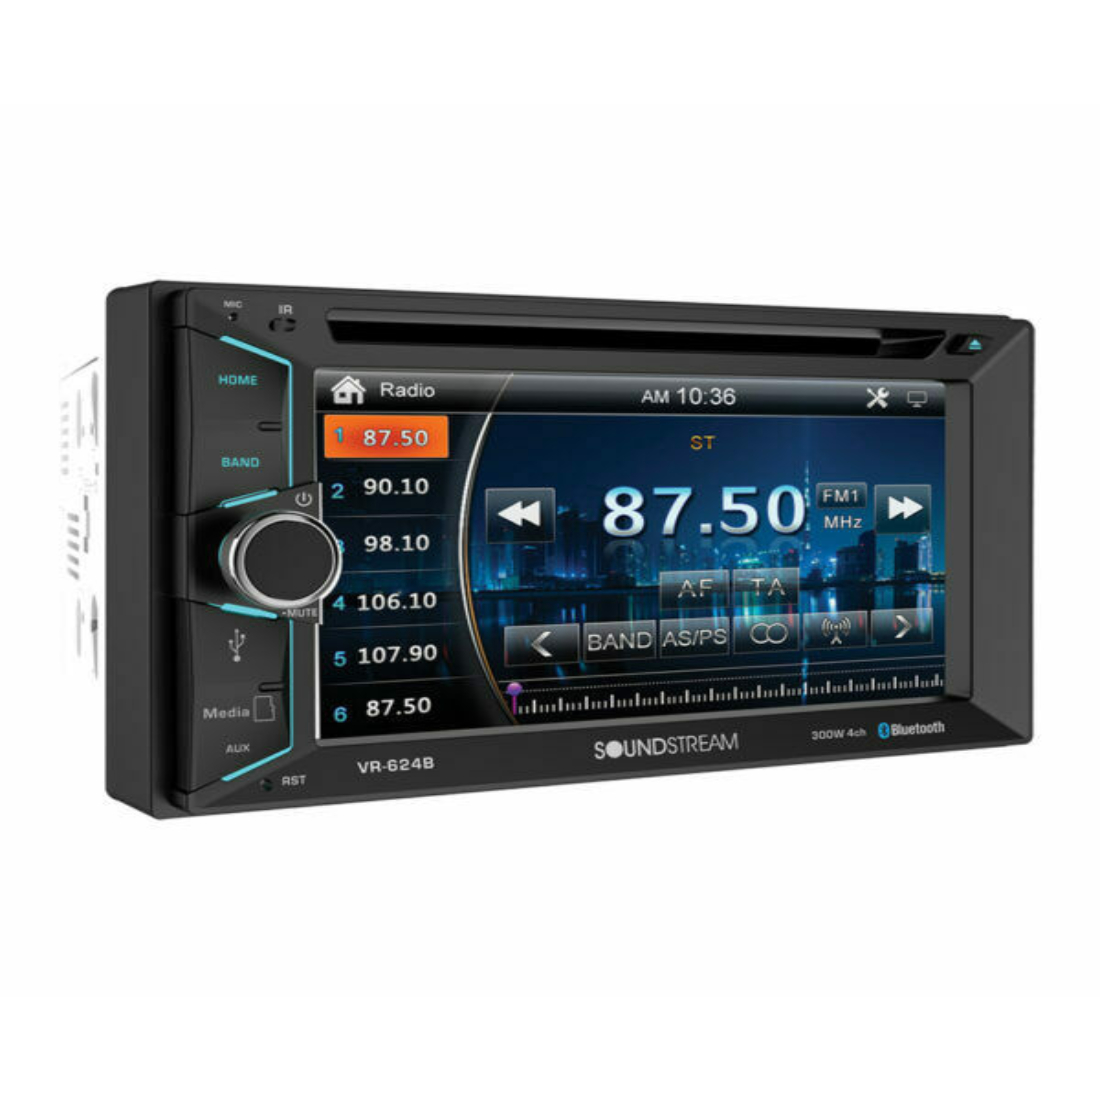 Soundstream VR-624B 6.2" Double-DIN DVD Head Unit with Bluetooth - image 2 of 3